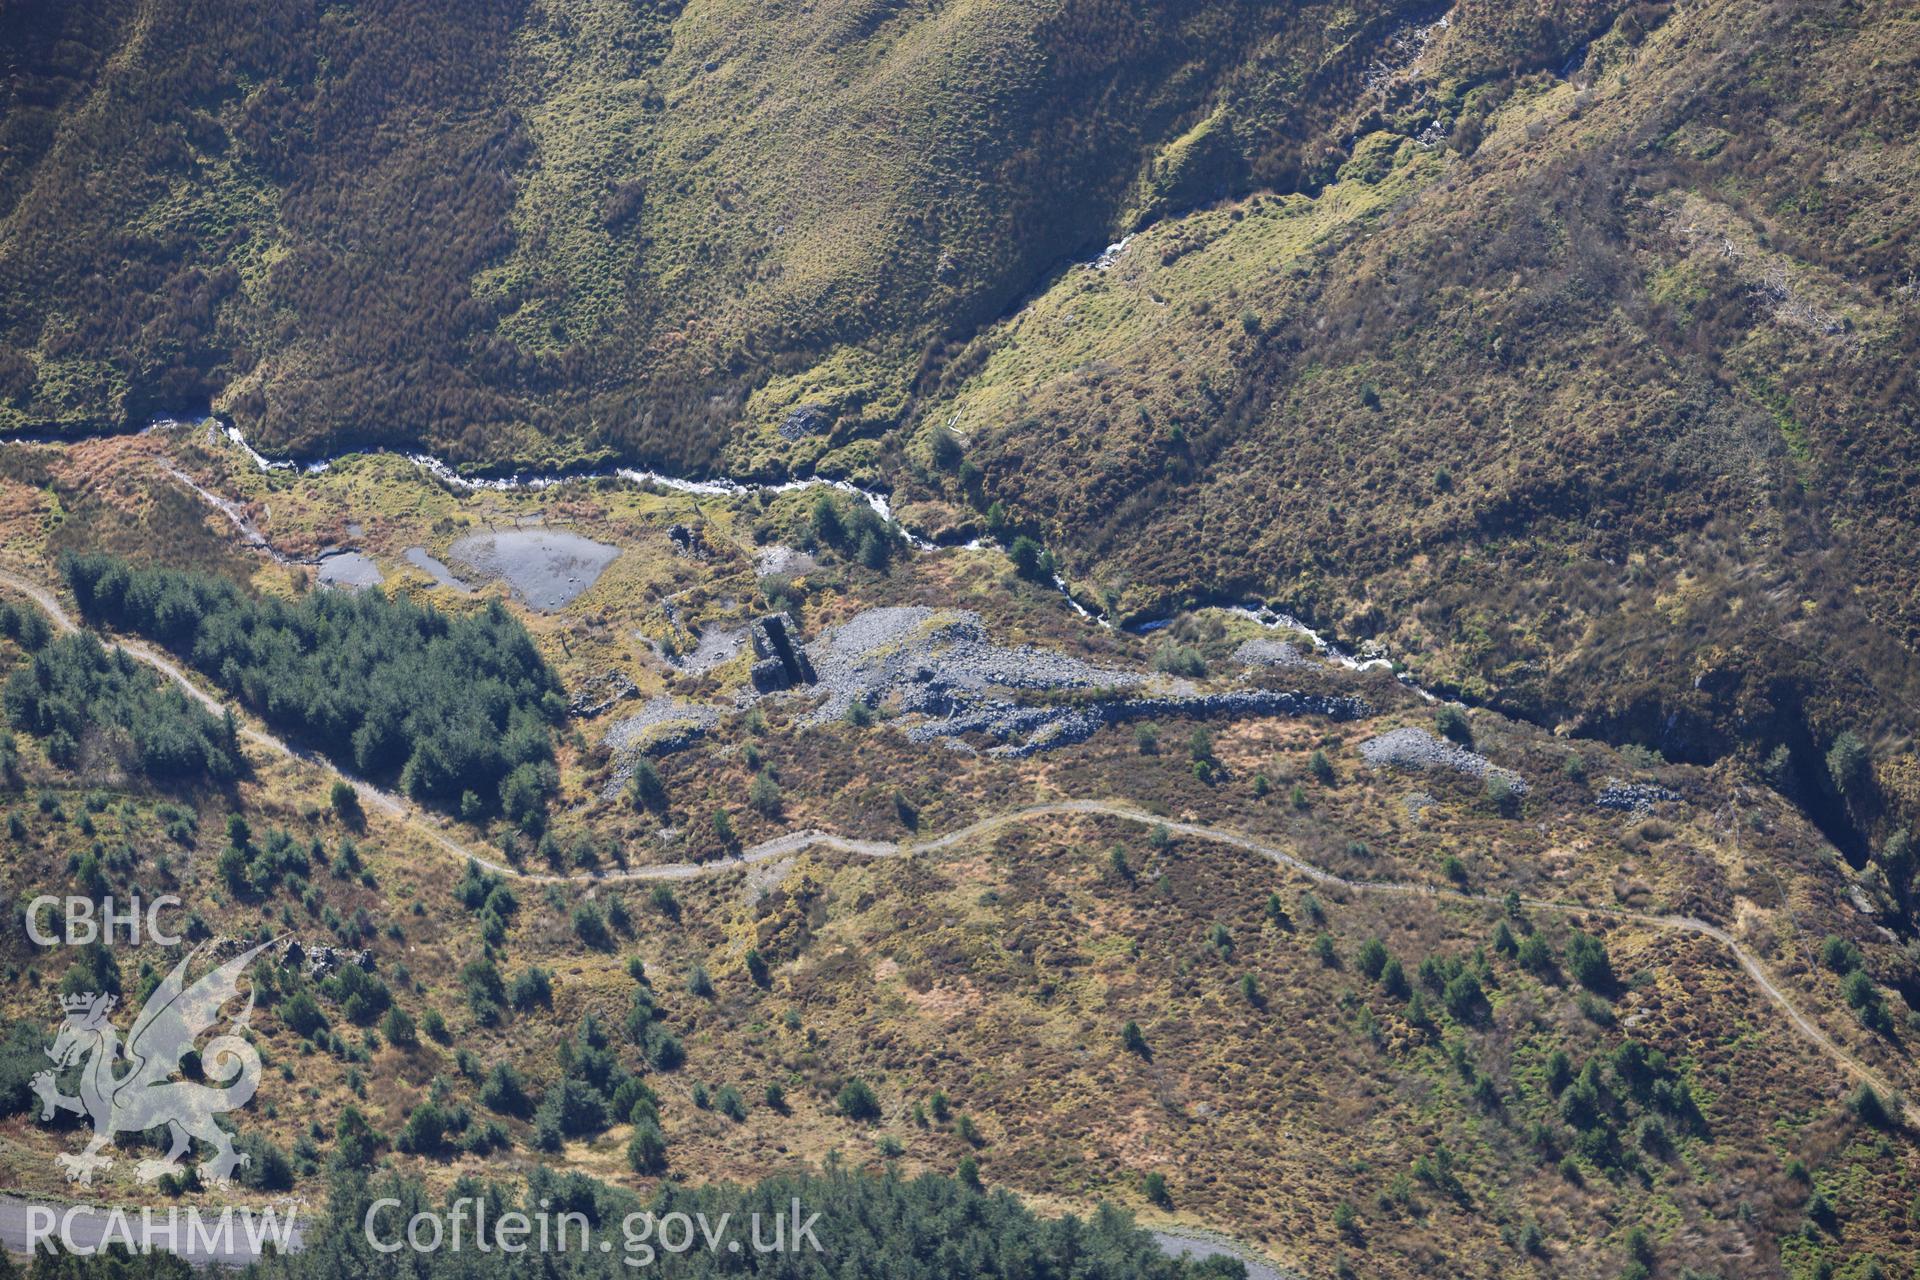 RCAHMW colour oblique photograph of Nant-yr-Eira mine. Taken by Toby Driver on 05/11/2012.